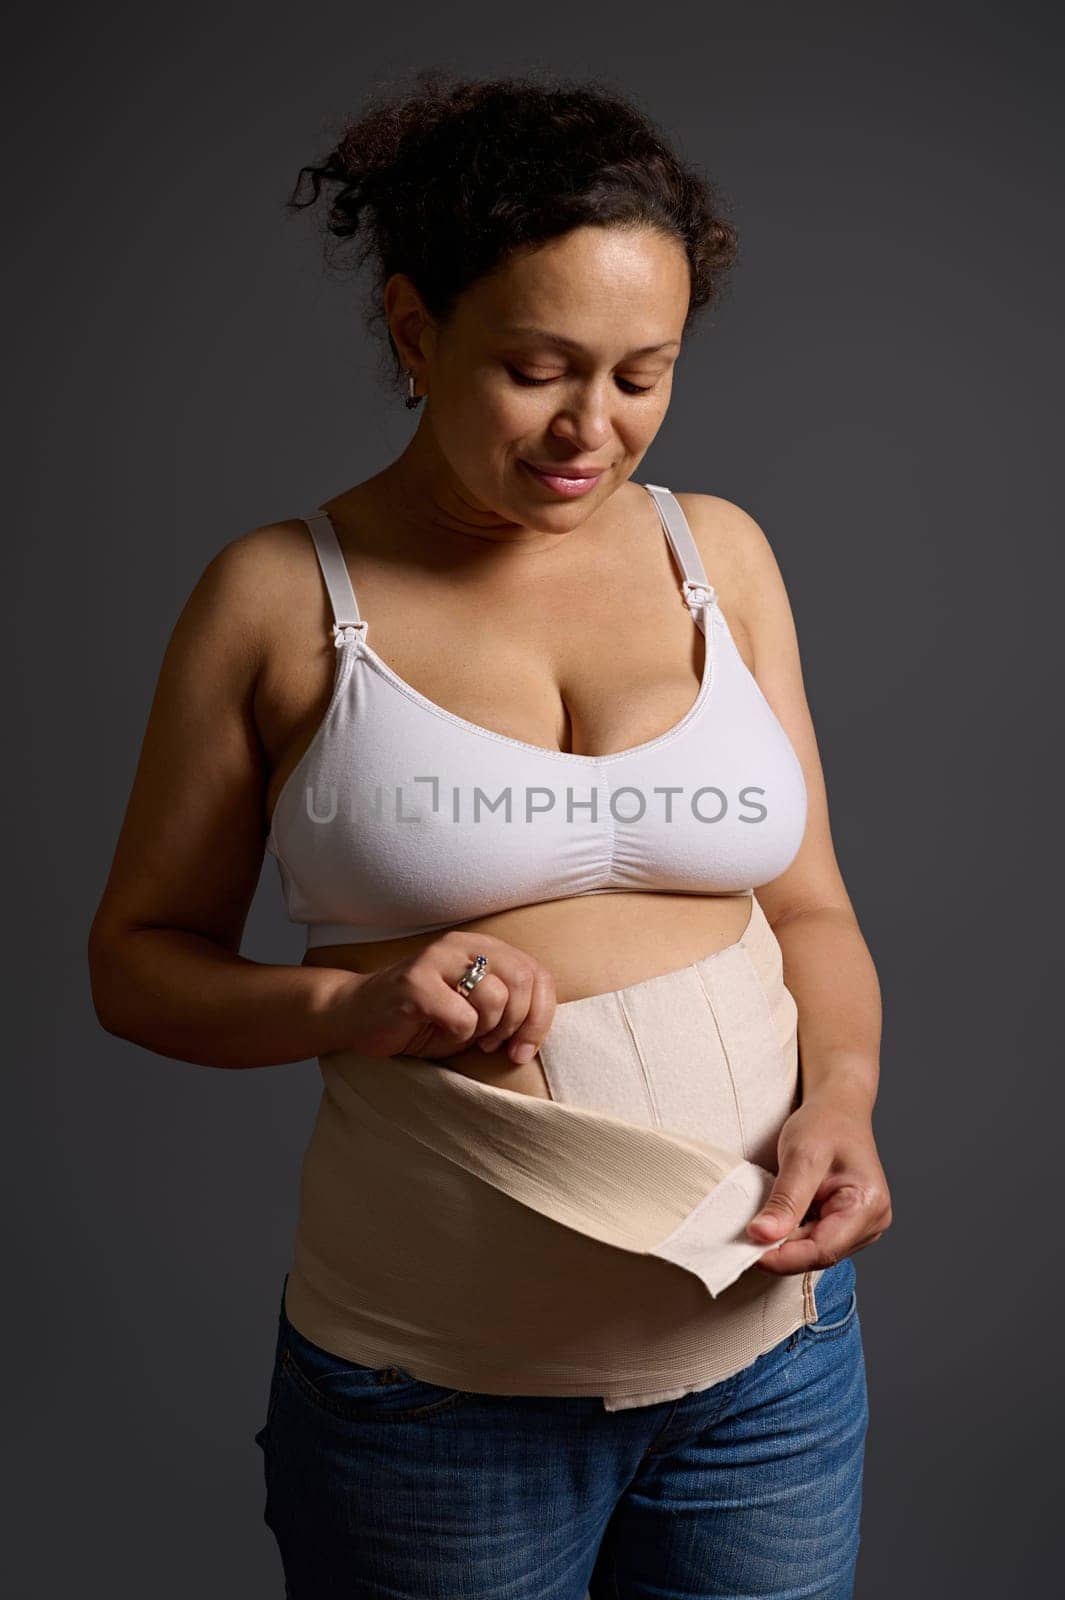 Middle aged woman post pregnancy and childbirth, putting on an elastic bandage after surgical operation cesarean section, isolated over gray background. Postpartum recovery period. Skin and body care